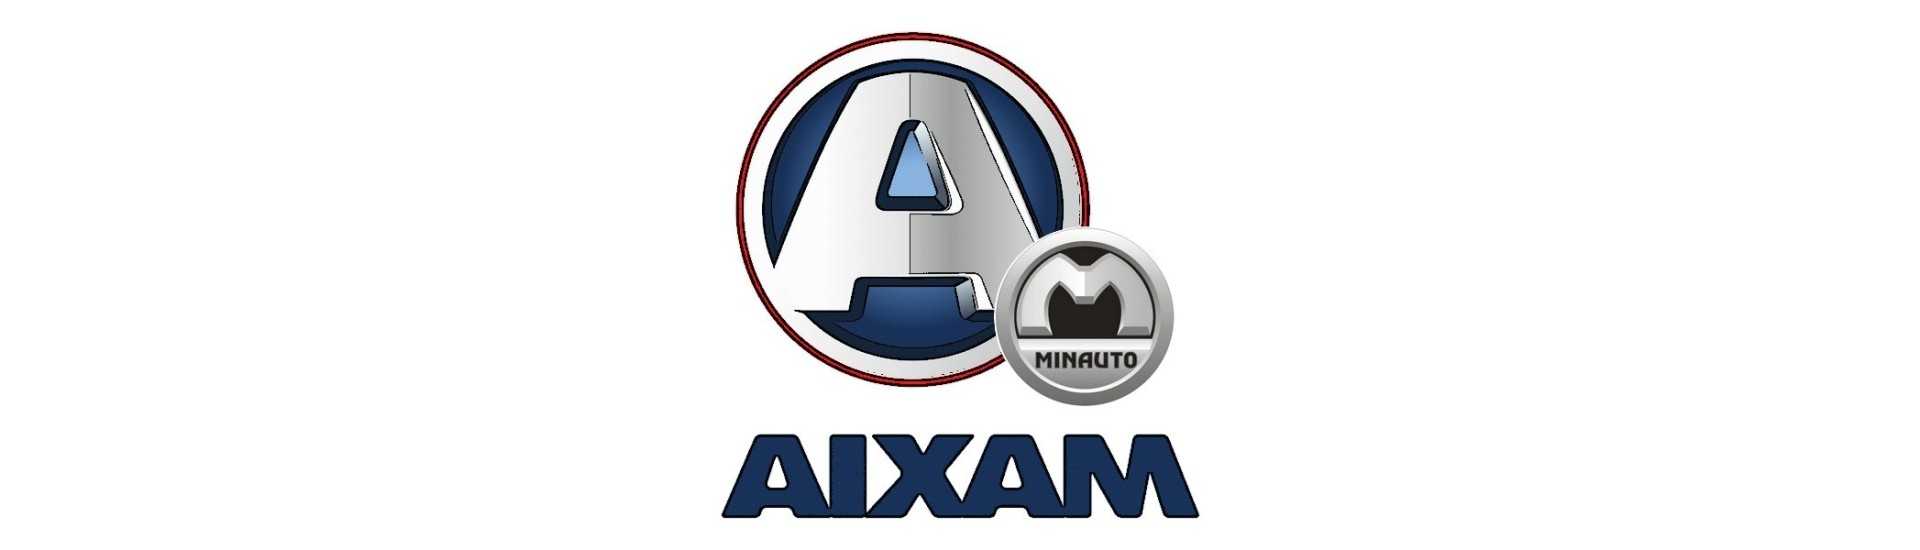 Silent block at best price for car without license Aixam Minauto